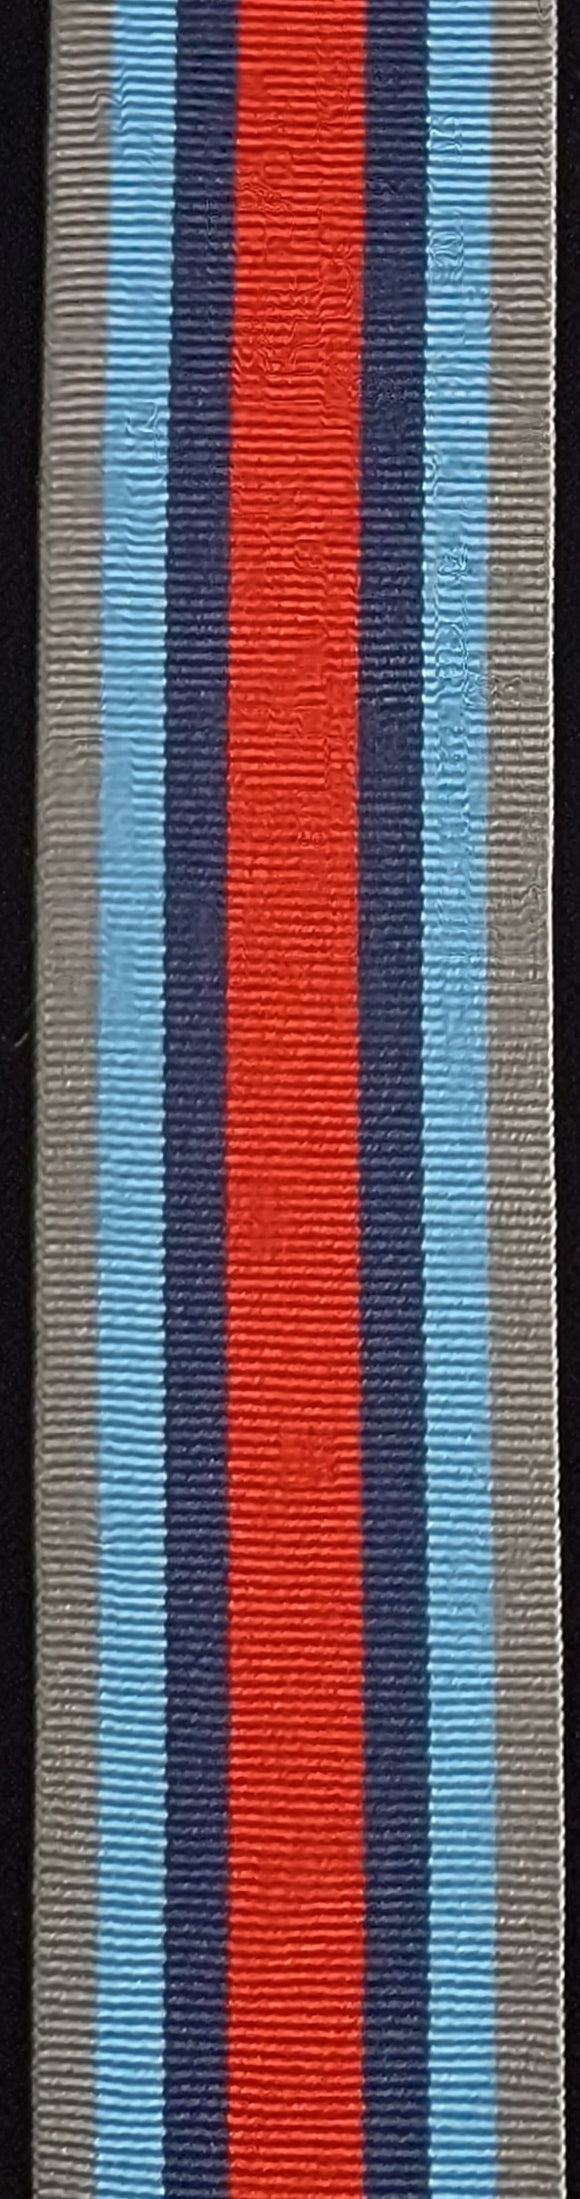 Ribbon, UK Operational Service Medal Iraq and Syria